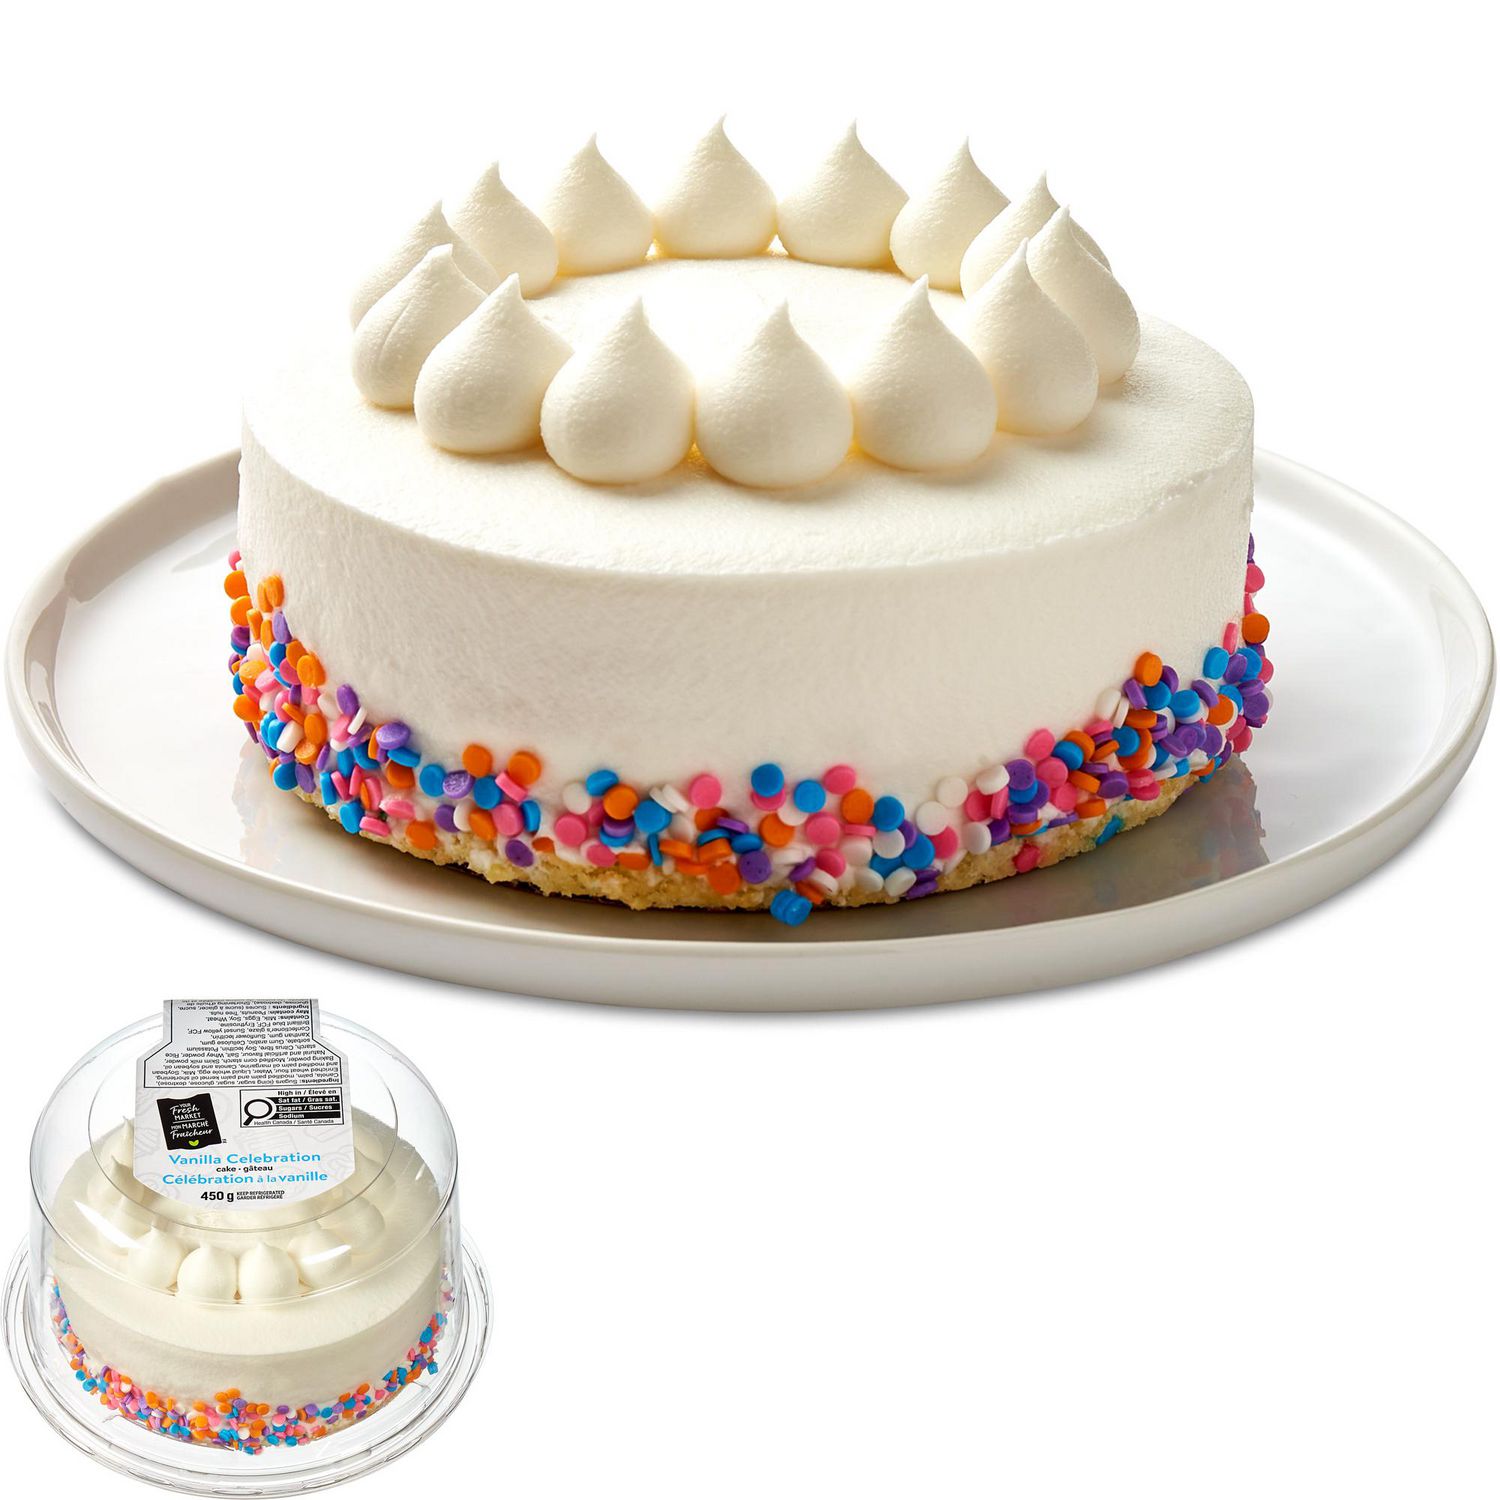 Cake Delivery in Canada, Send Cakes to Toronto Canada, Canada Cake - FNP